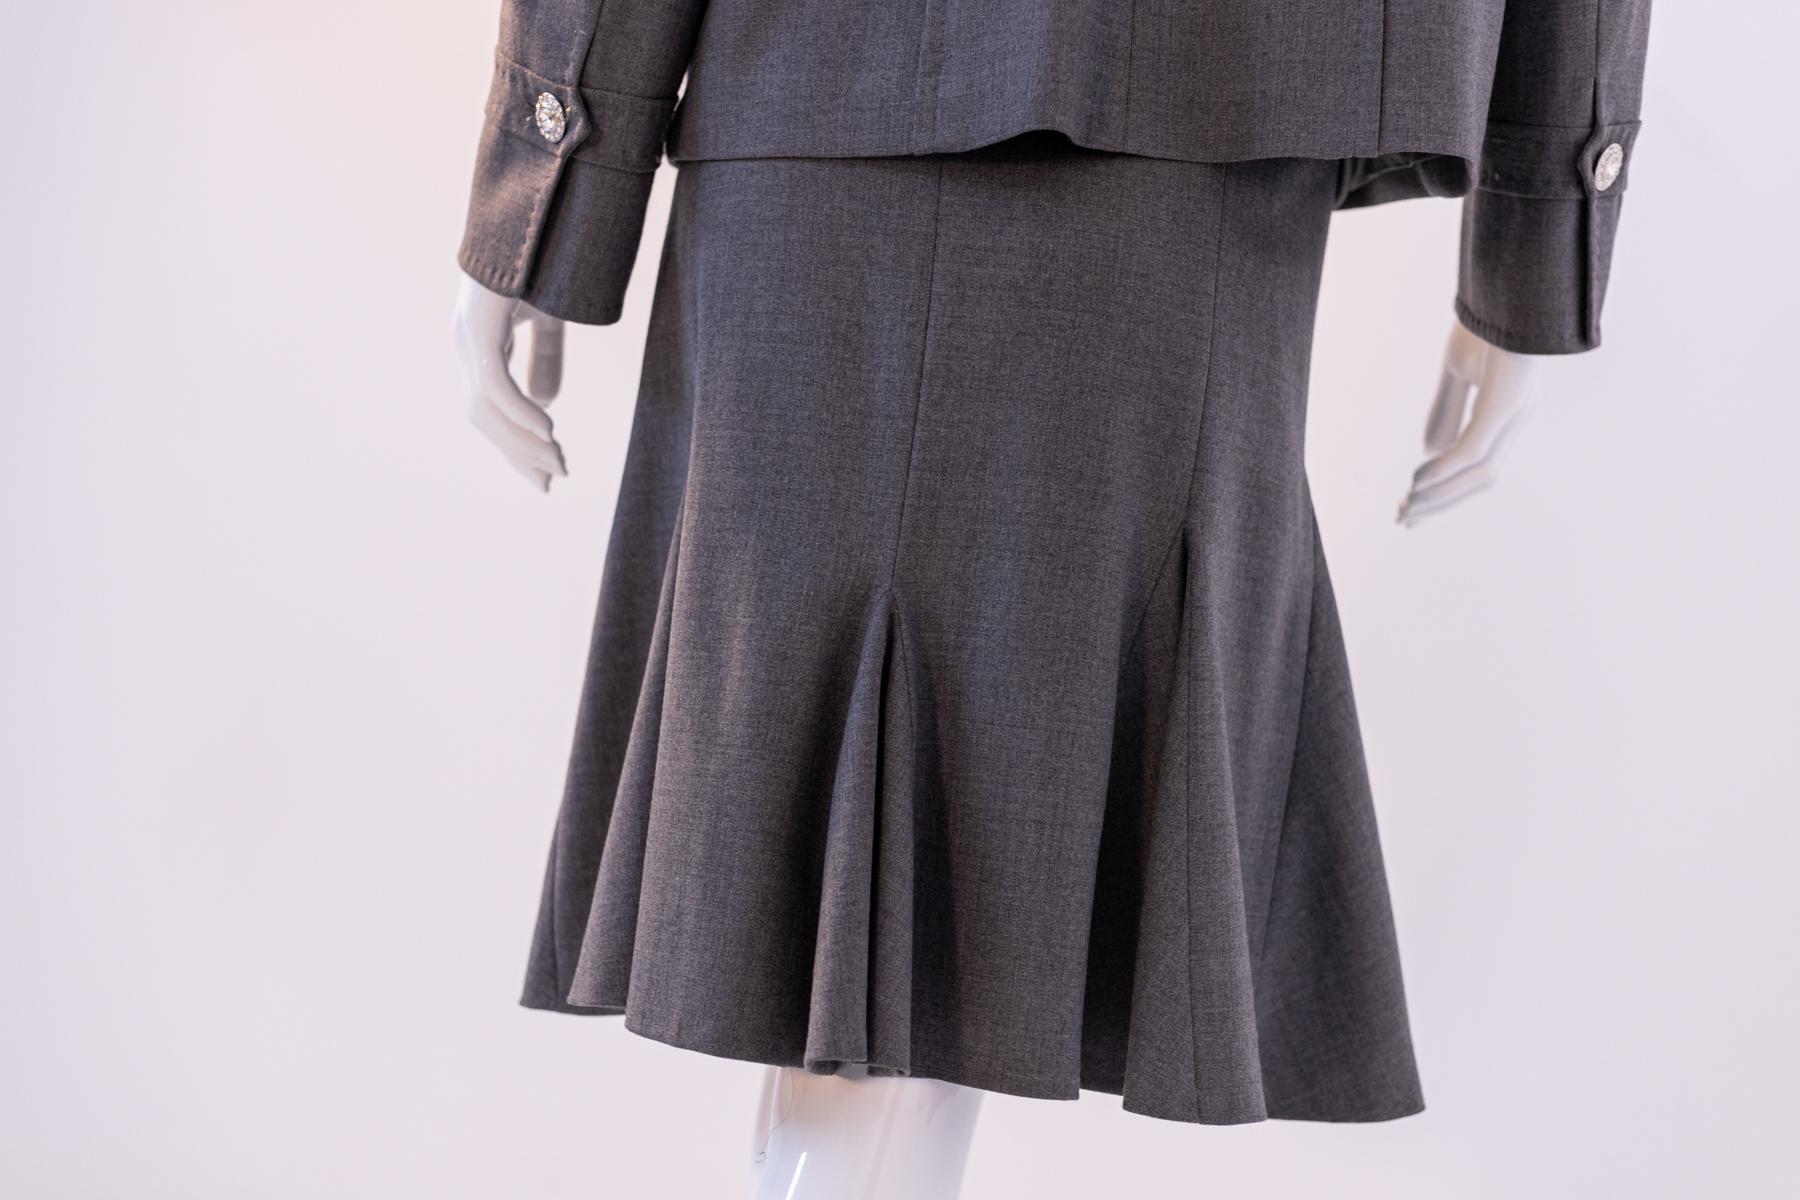 Luisa Spagnoli Vintage Chic Grey Wool Skirt Suit In Good Condition For Sale In Milano, IT